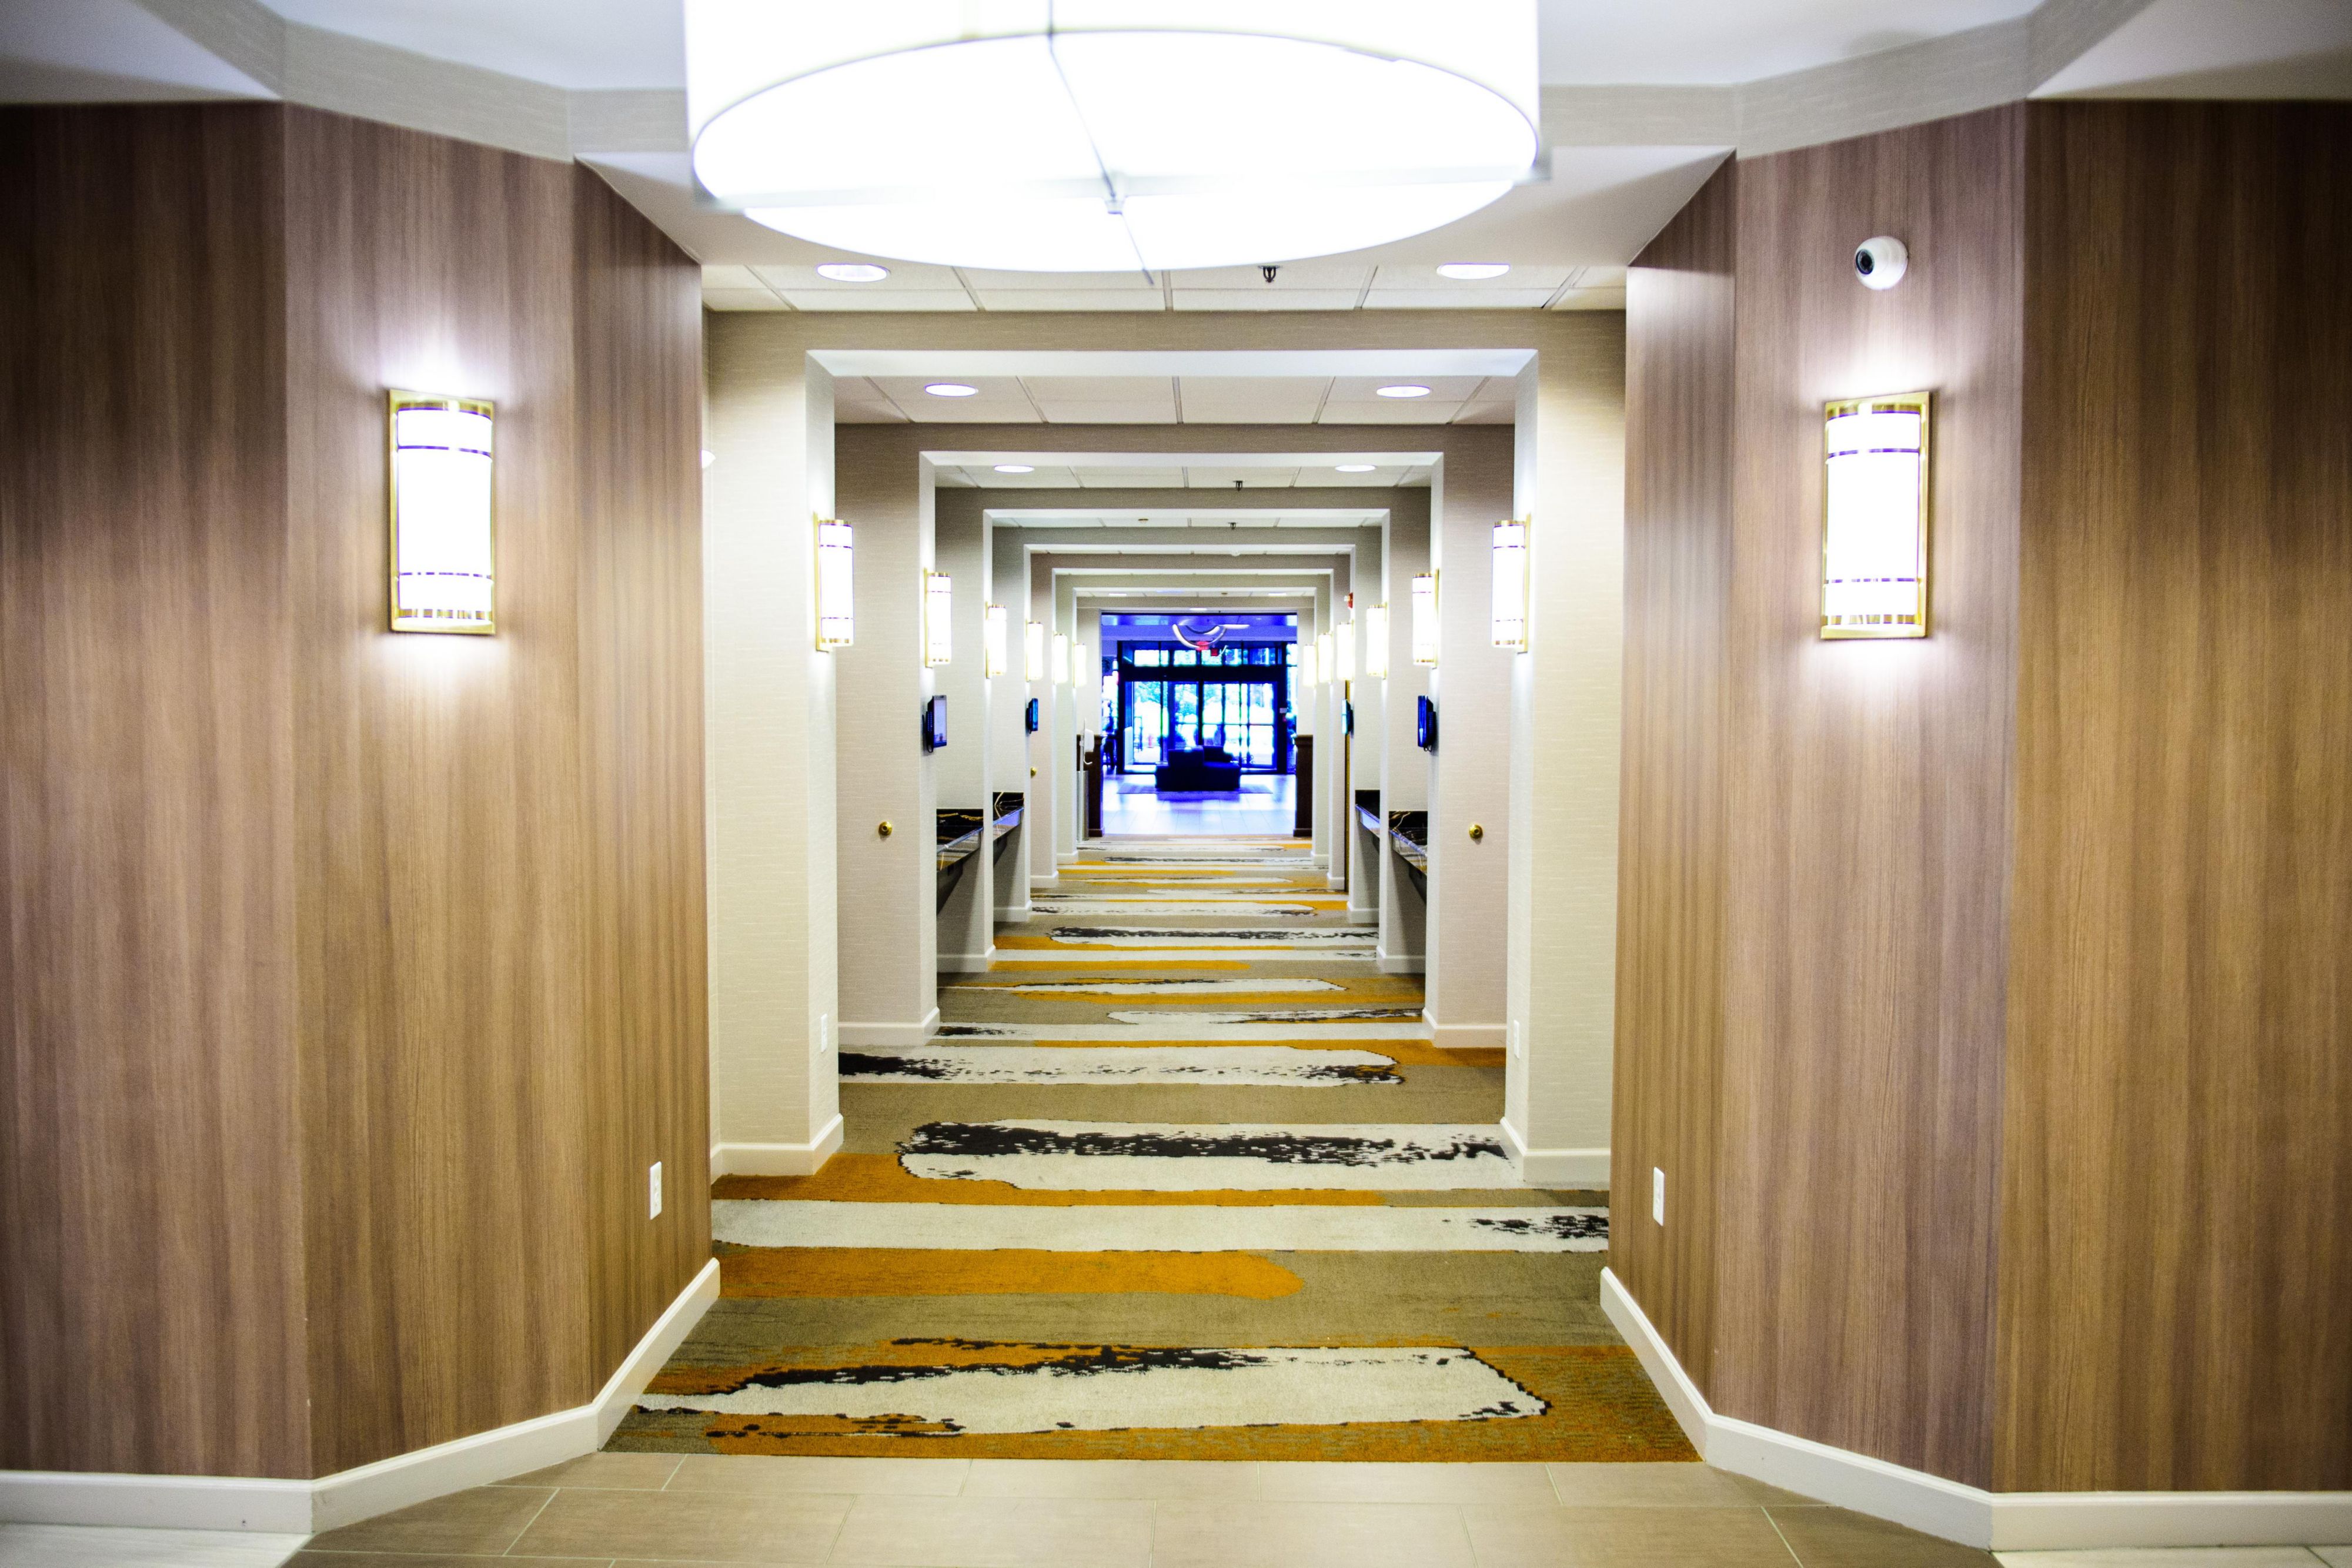 Lobby level hallway leading from function space